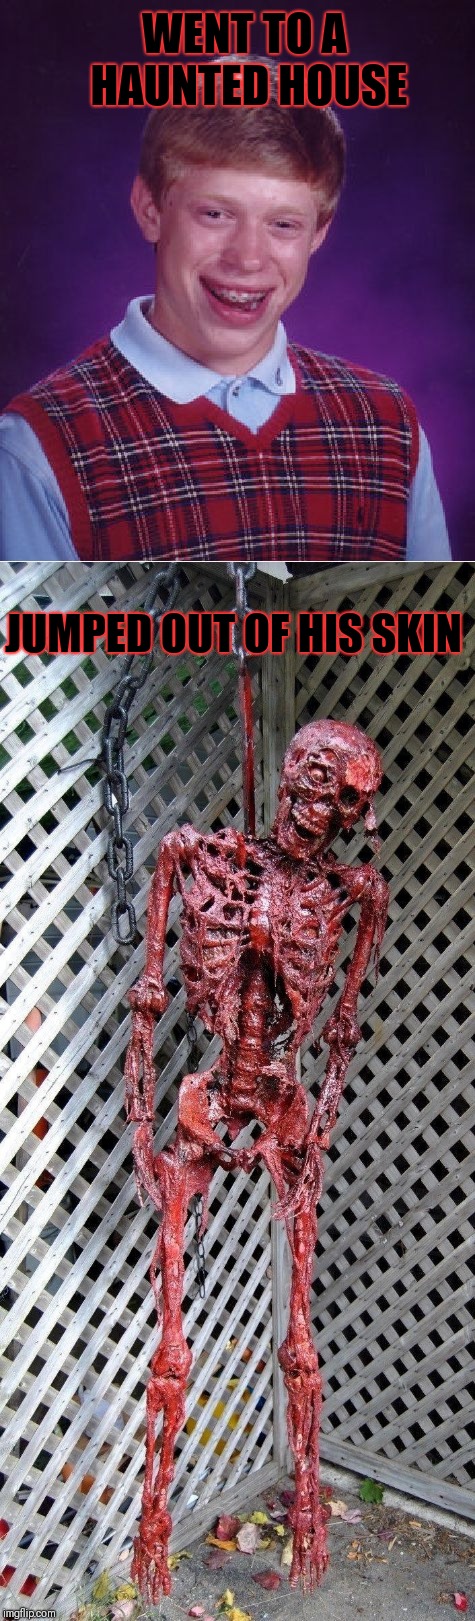 Bad Luck Brian Scared Skinless | WENT TO A HAUNTED HOUSE; JUMPED OUT OF HIS SKIN | image tagged in memes,funny,bad luck brian,zombie bad luck brian,halloween | made w/ Imgflip meme maker